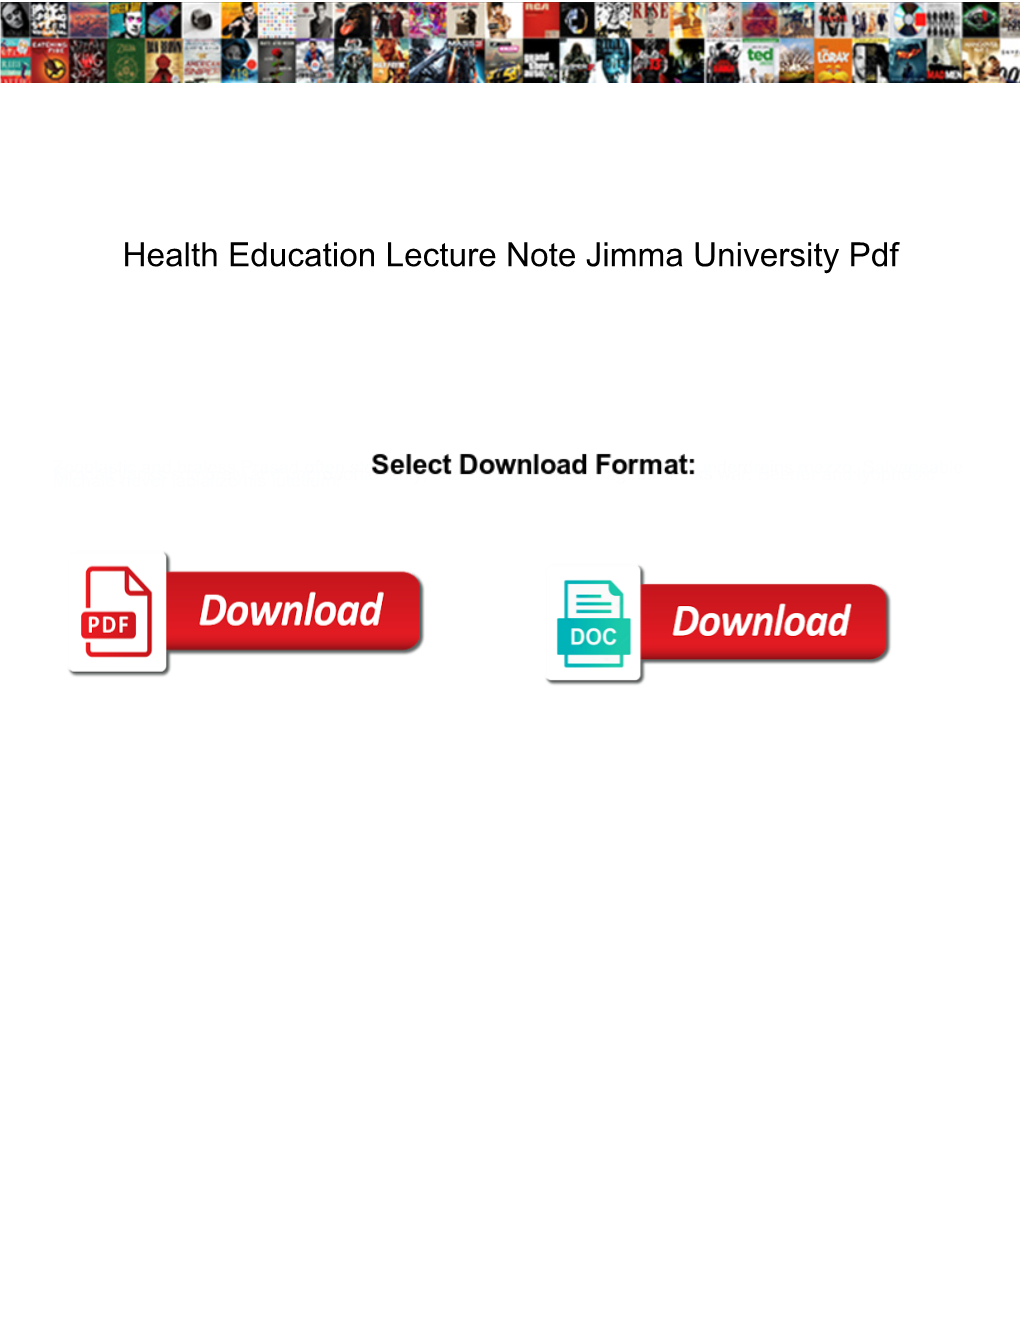 Health Education Lecture Note Jimma University Pdf